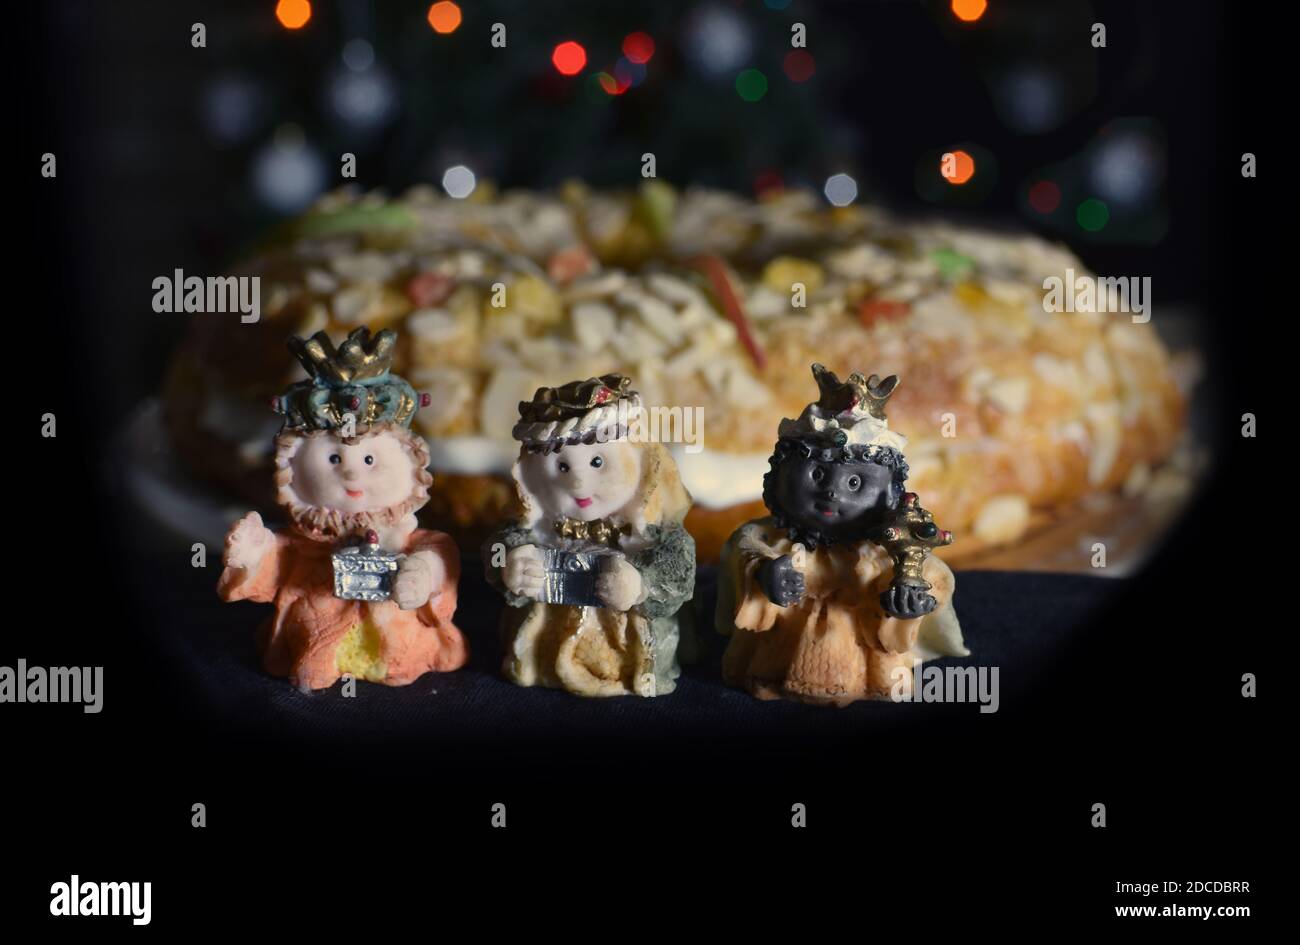 'Roscon de Reyes' (Kings cake), Spanish tradicional cake to celebrate the Epiphany day at Christmas, with the three kings of orient. Stock Photo